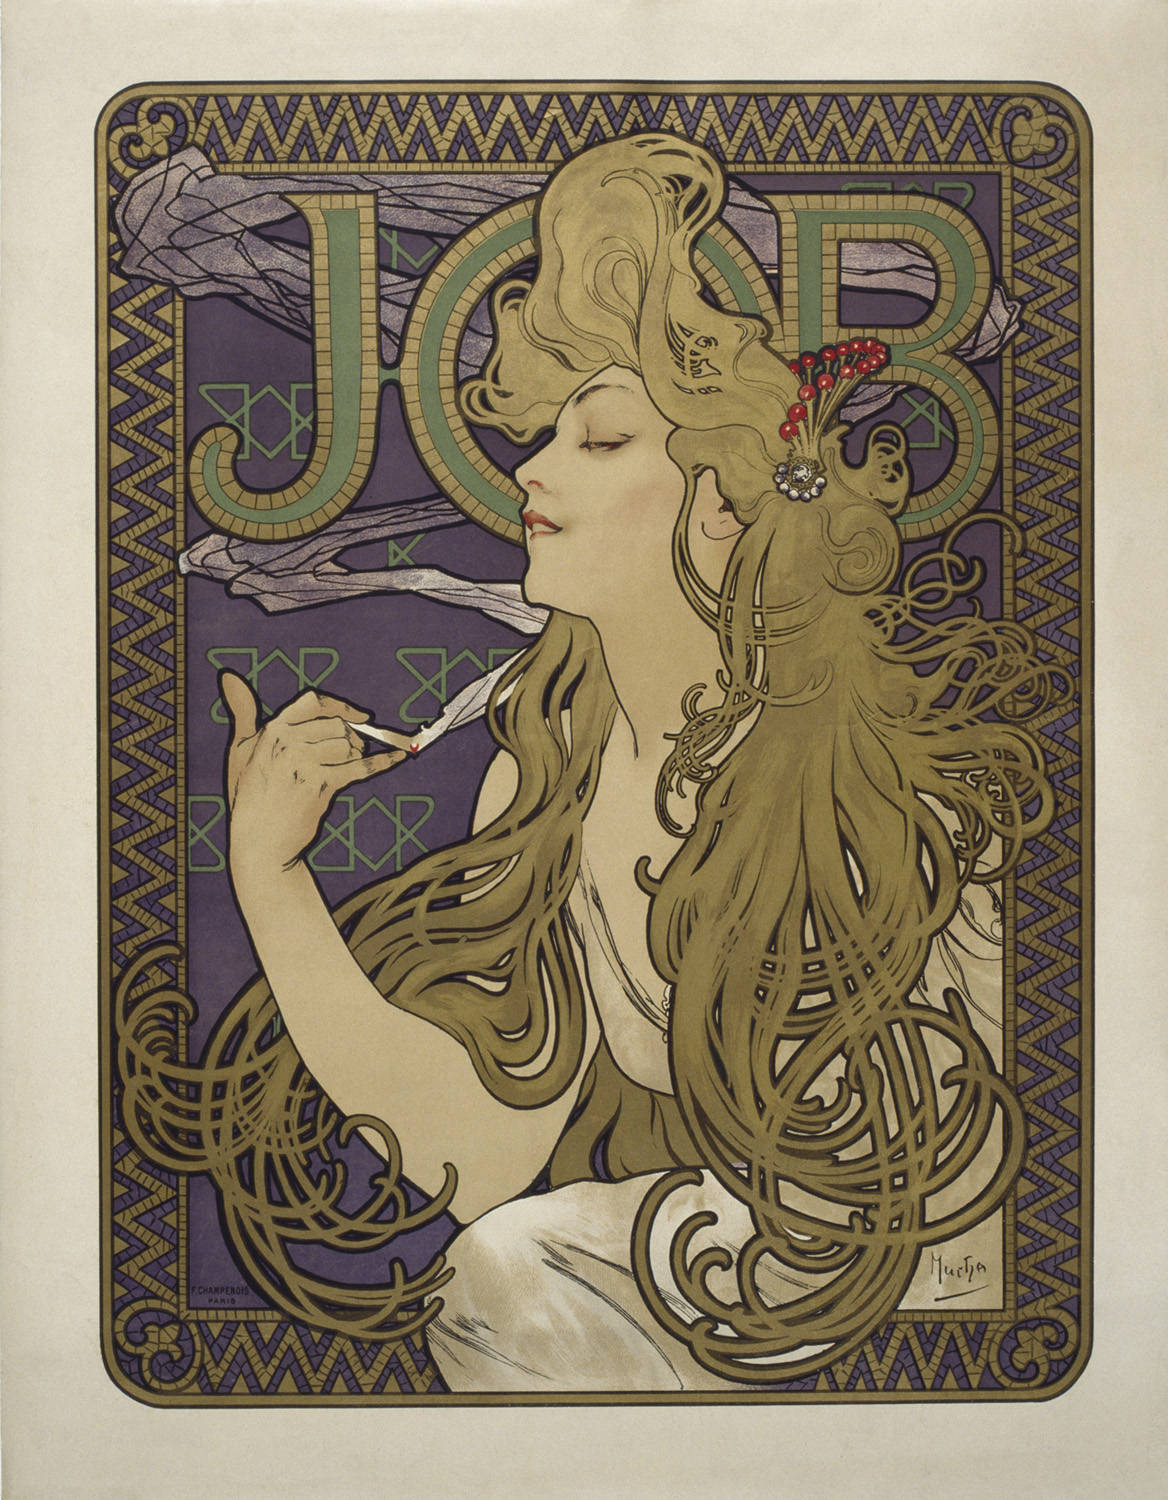 Job by Alphonse Mucha - 1896 - 66.7 x 46.4 cm private collection